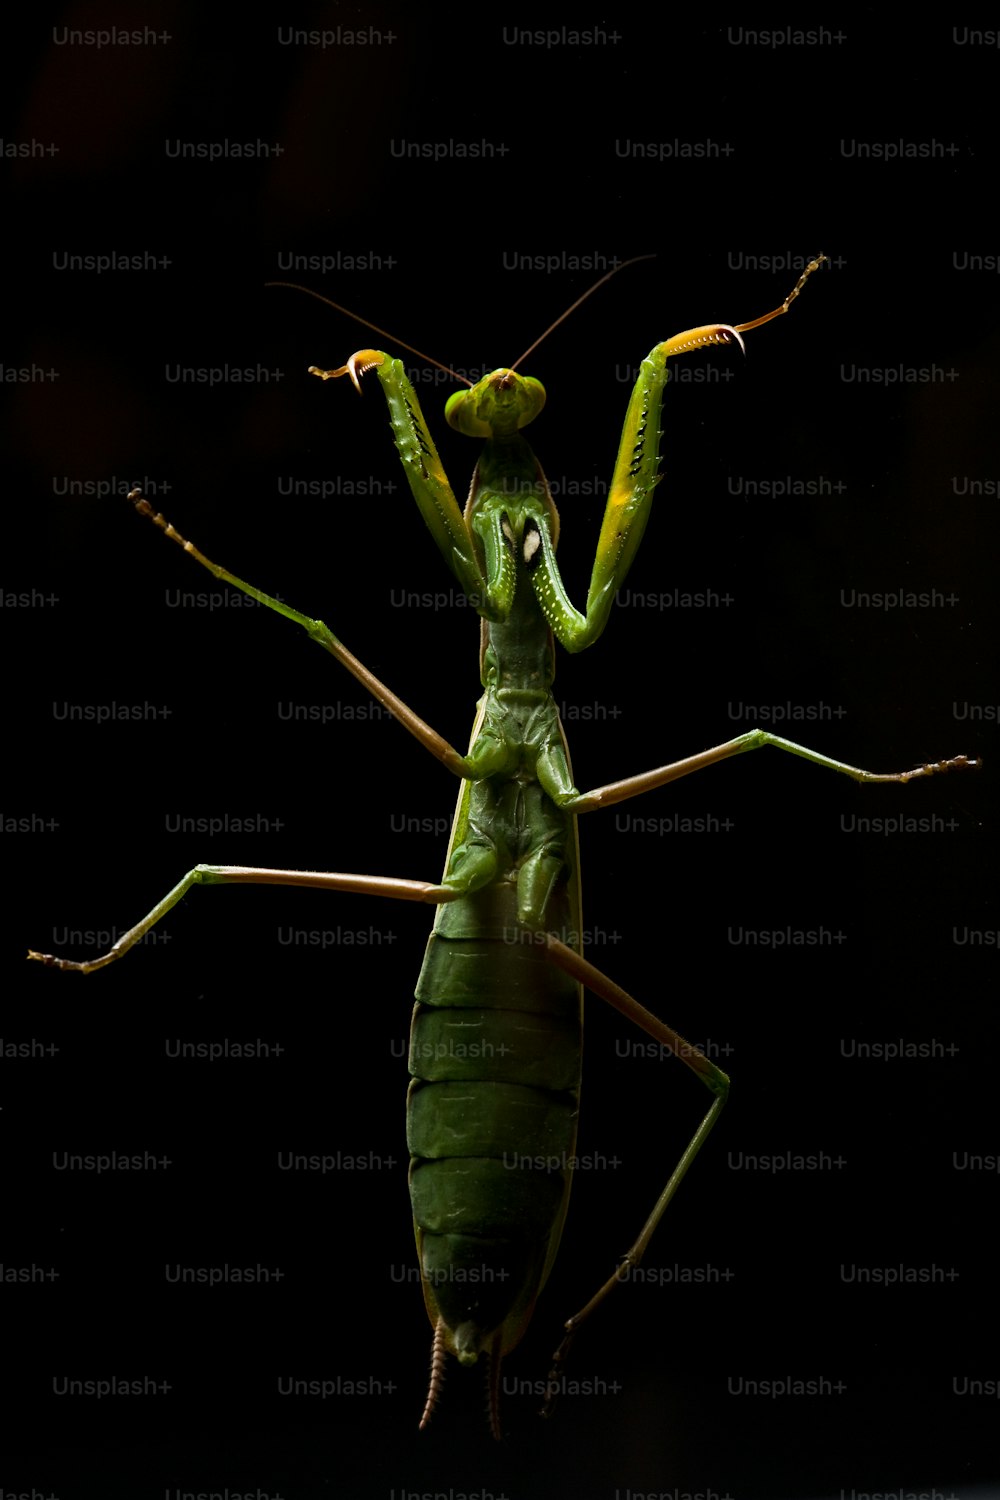 a close up of a green insect on a black background